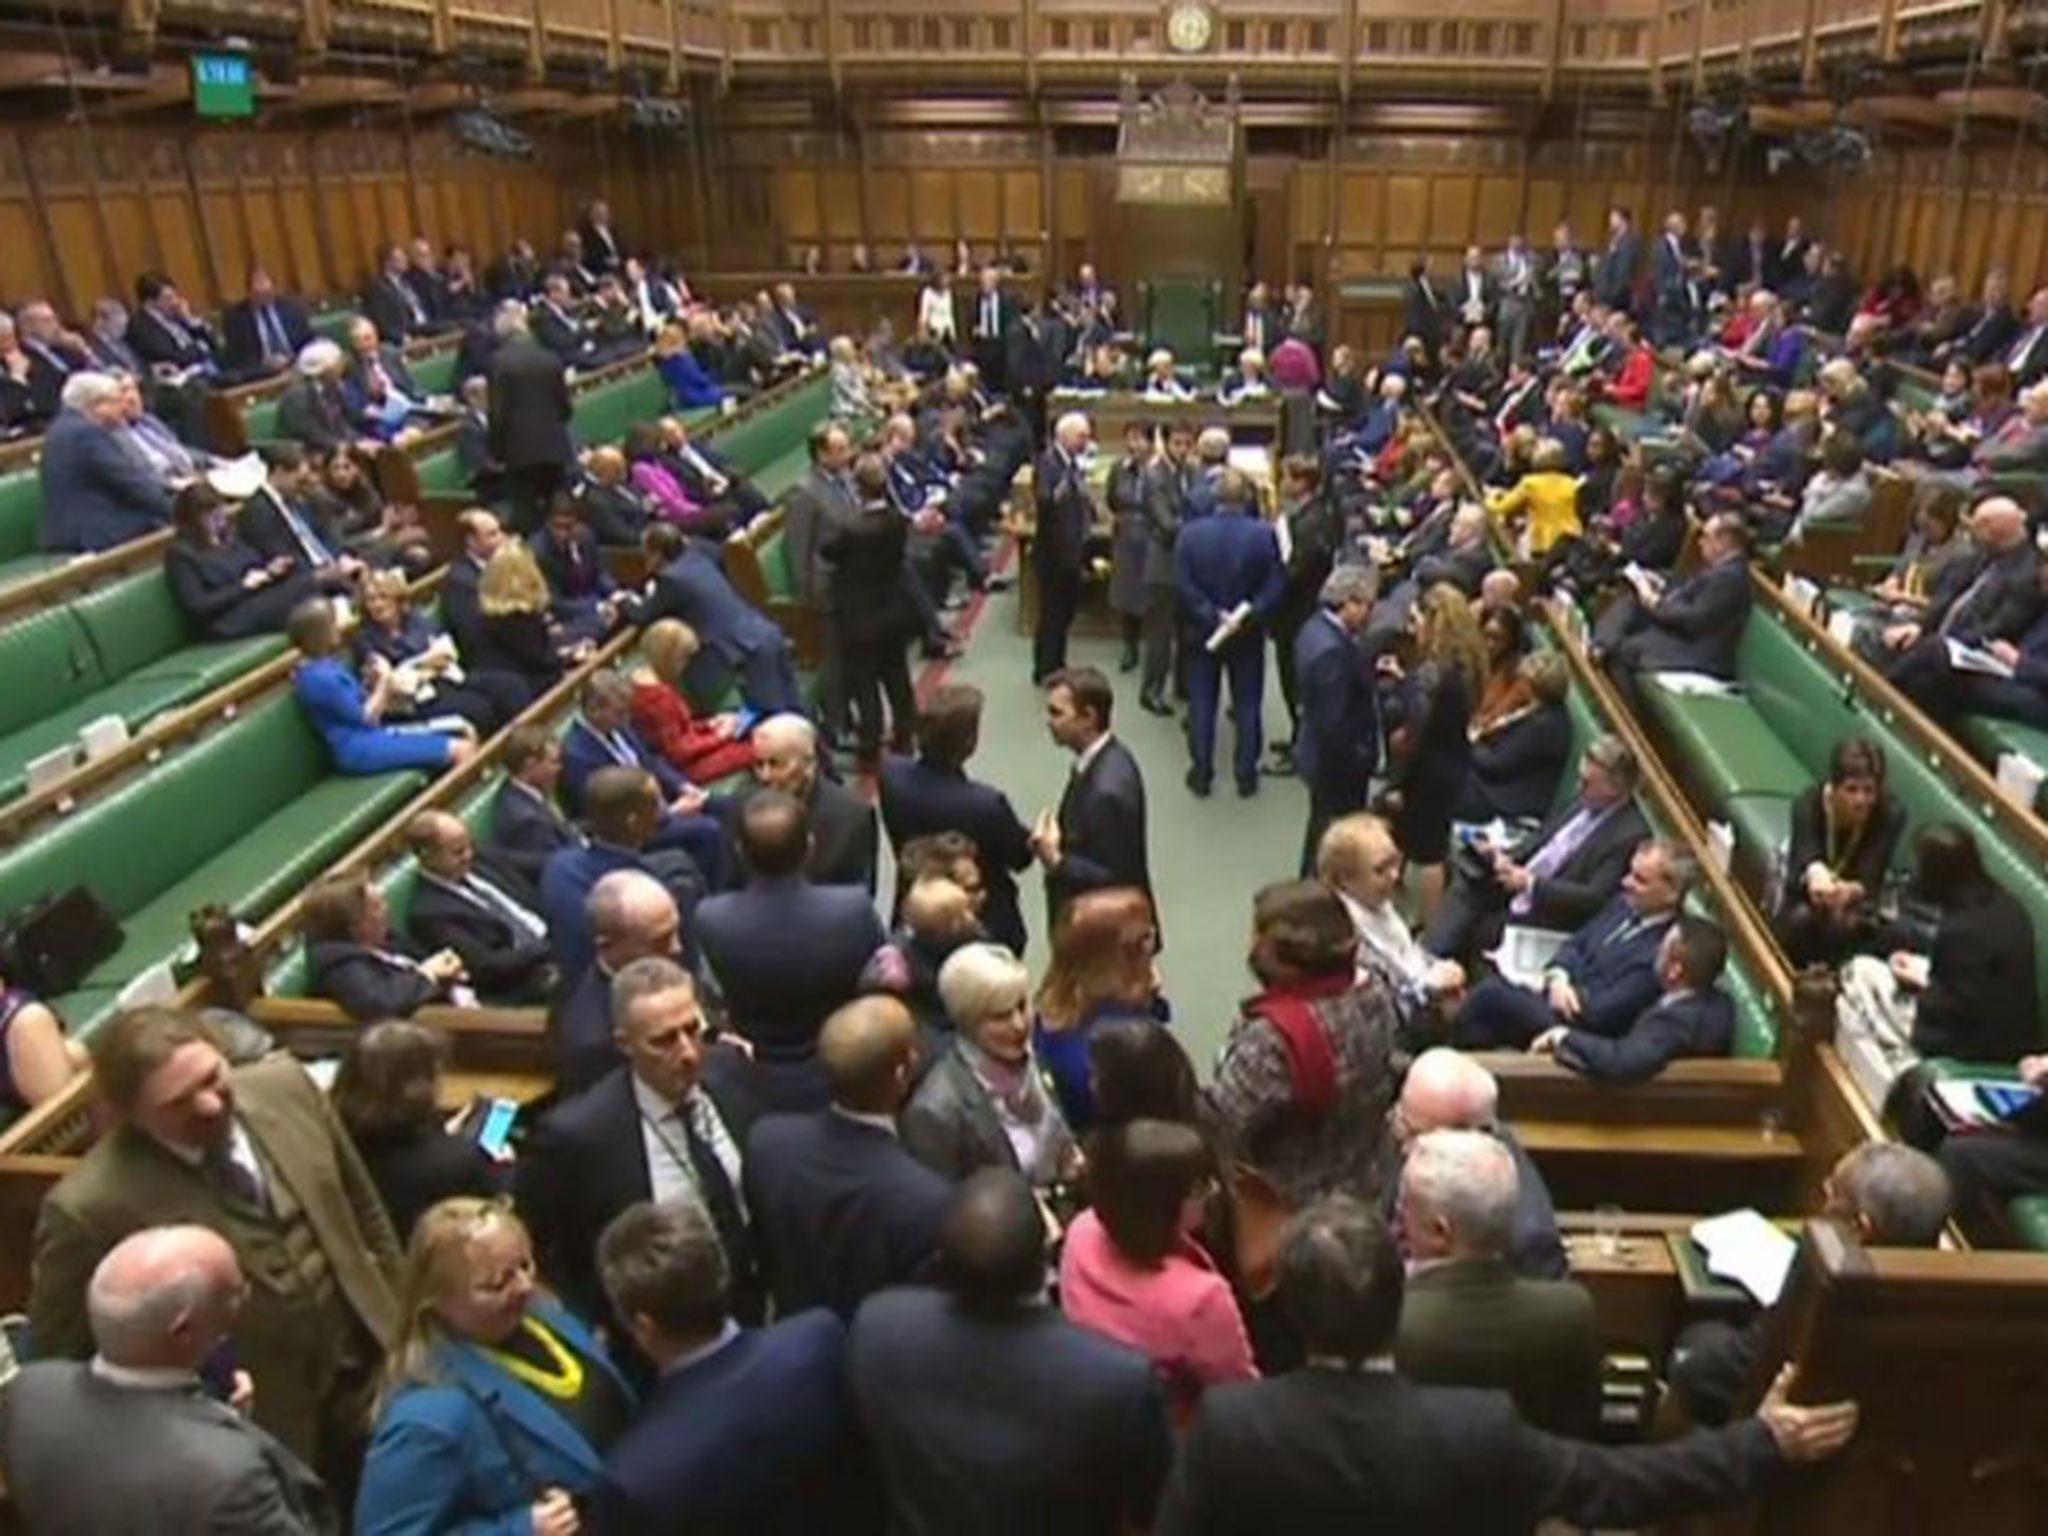 MPs during a vote in the House of Commons